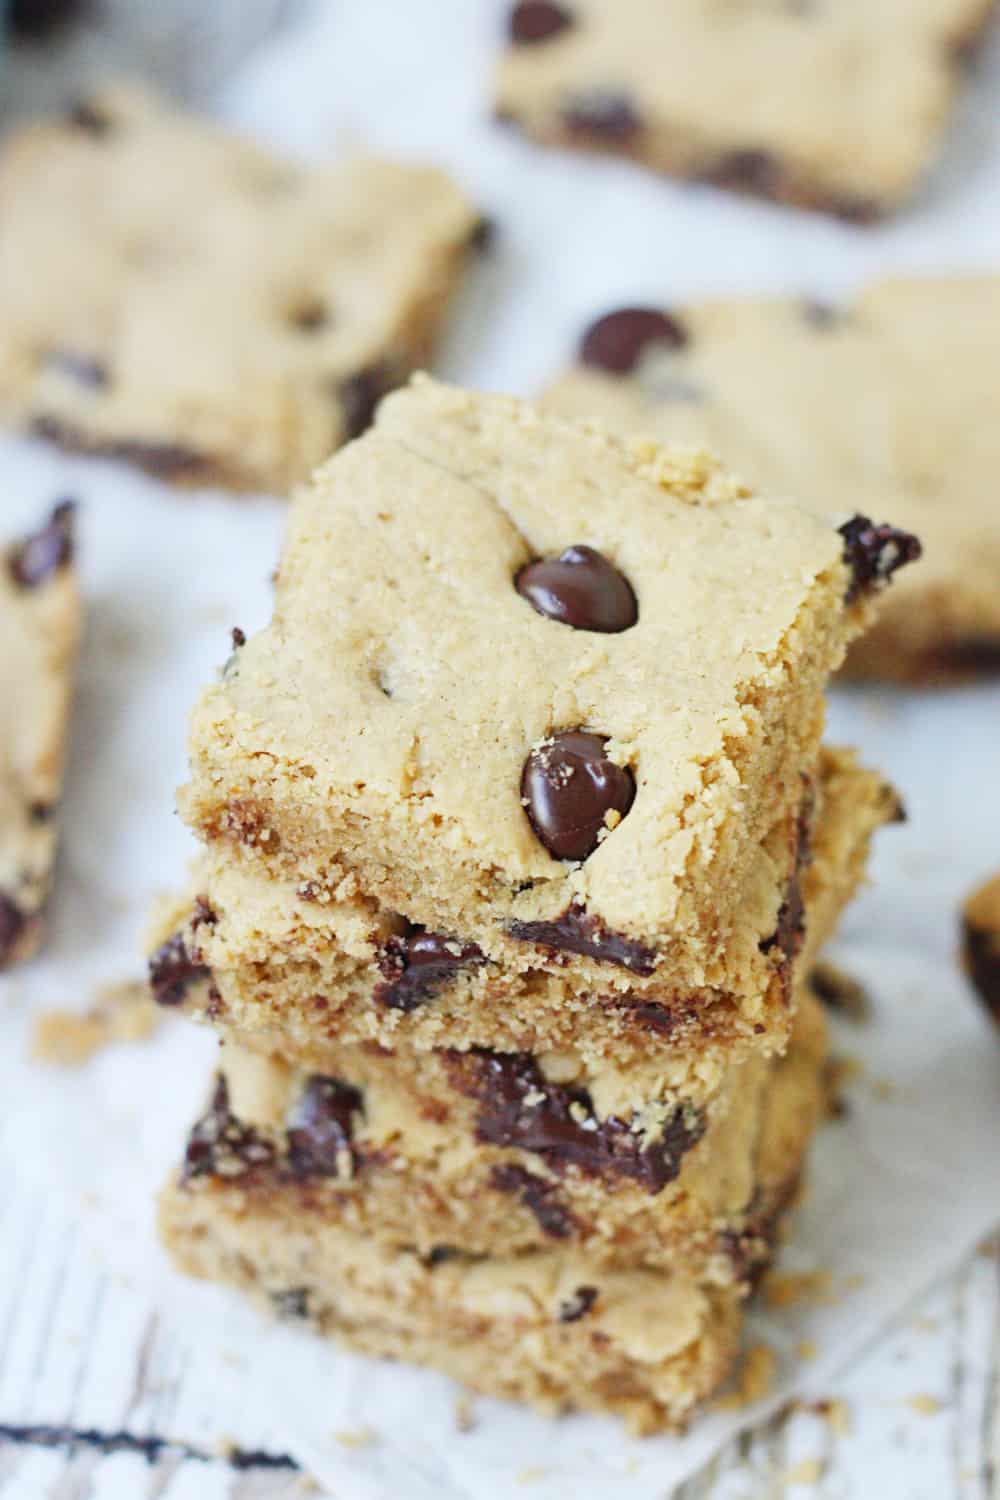 Healthy Peanut Butter Brownies with Dark Chocolate Chips -- These healthy peanut butter brownies are full of peanut butter flavor but not full of sugar and carbs. Dark chocolate chips make them even yummier! #healthy #healthyrecipe #lowcarb #brownies #healthybrownies #baking #healthybaking #halfscratched #peanutbutter #peanutbutterbrownies